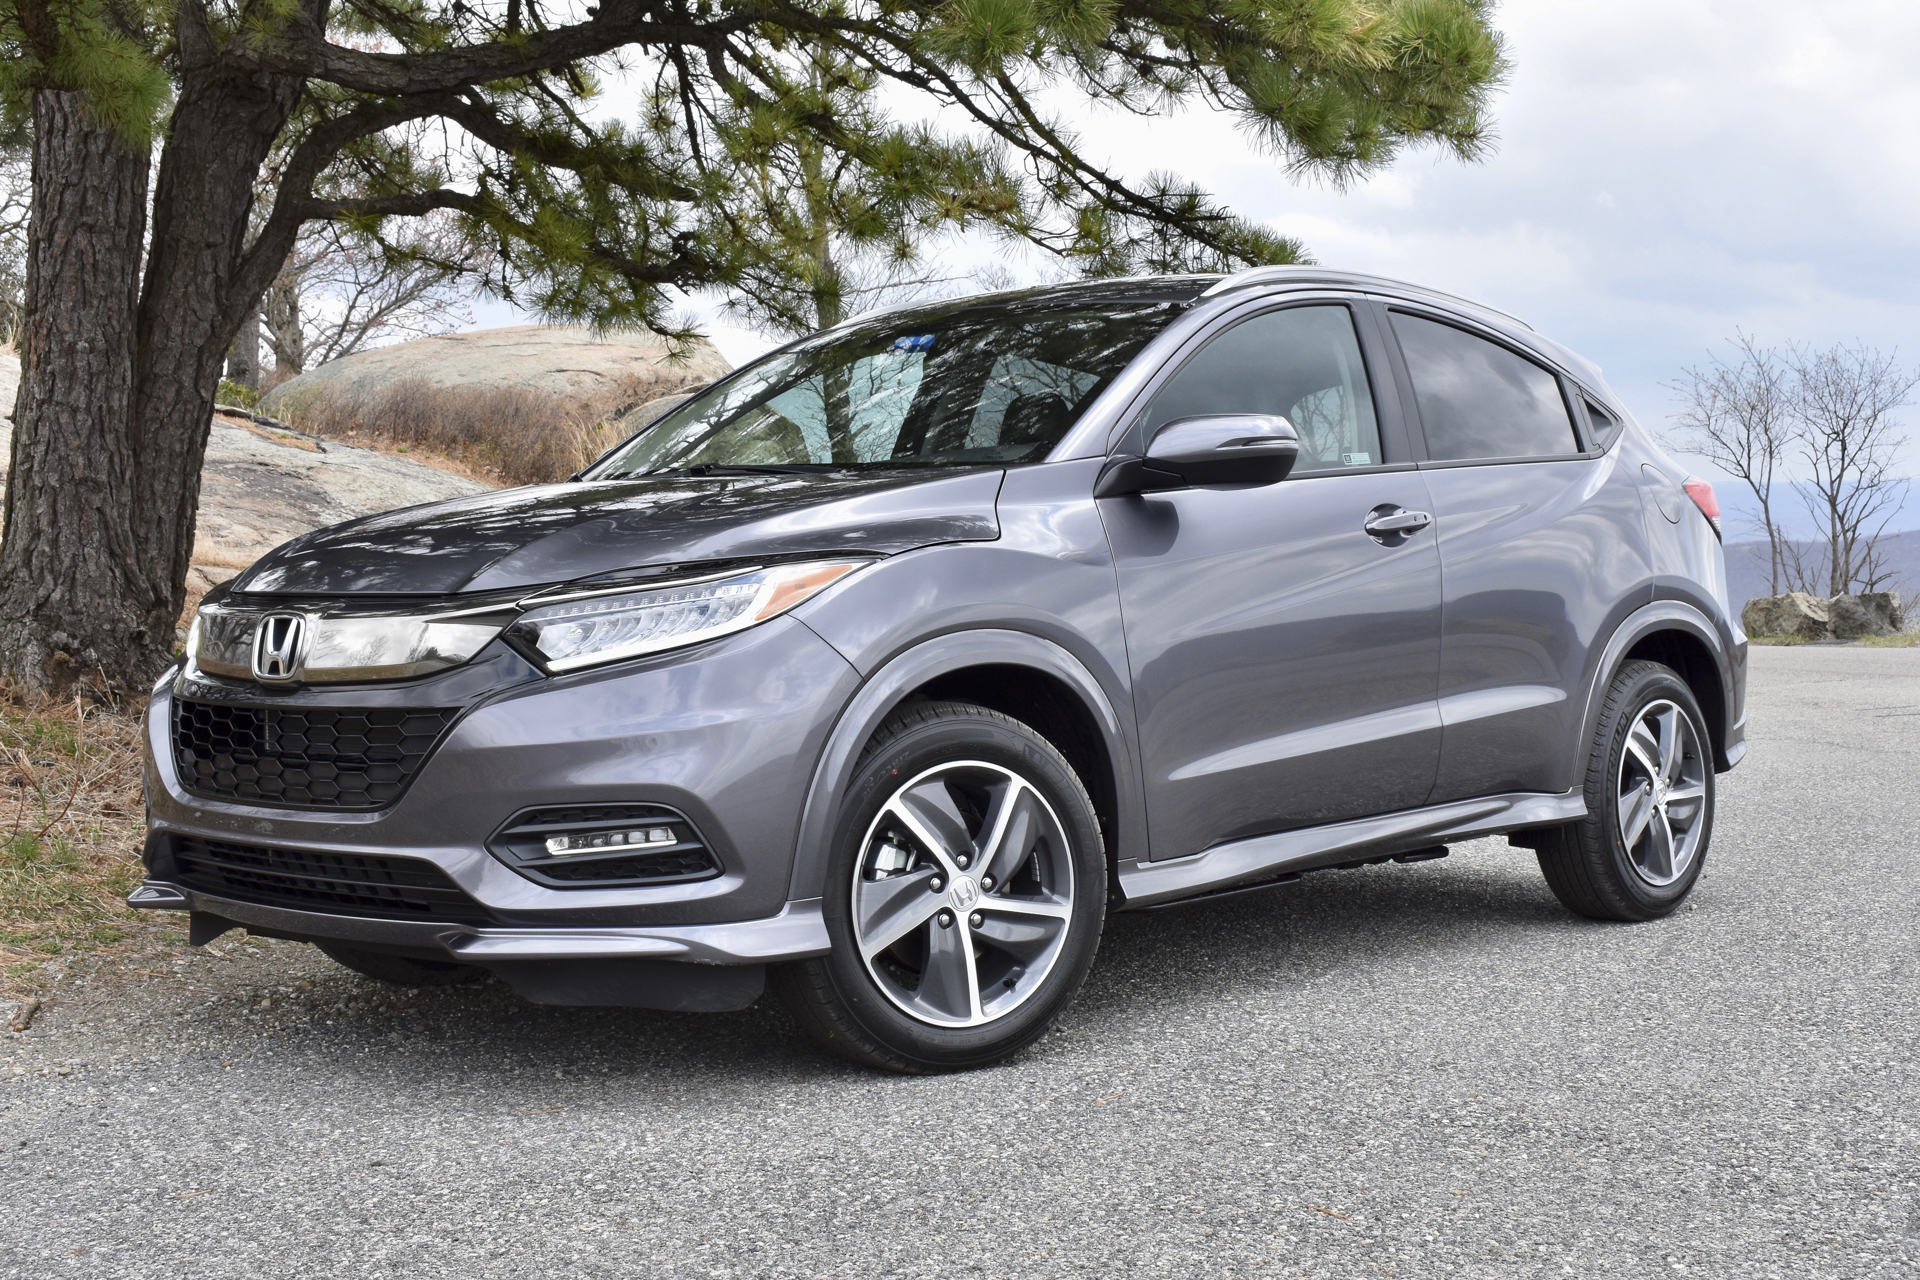 2019 Honda HR-V Touring Review: True Crossover In A Bite-size Package